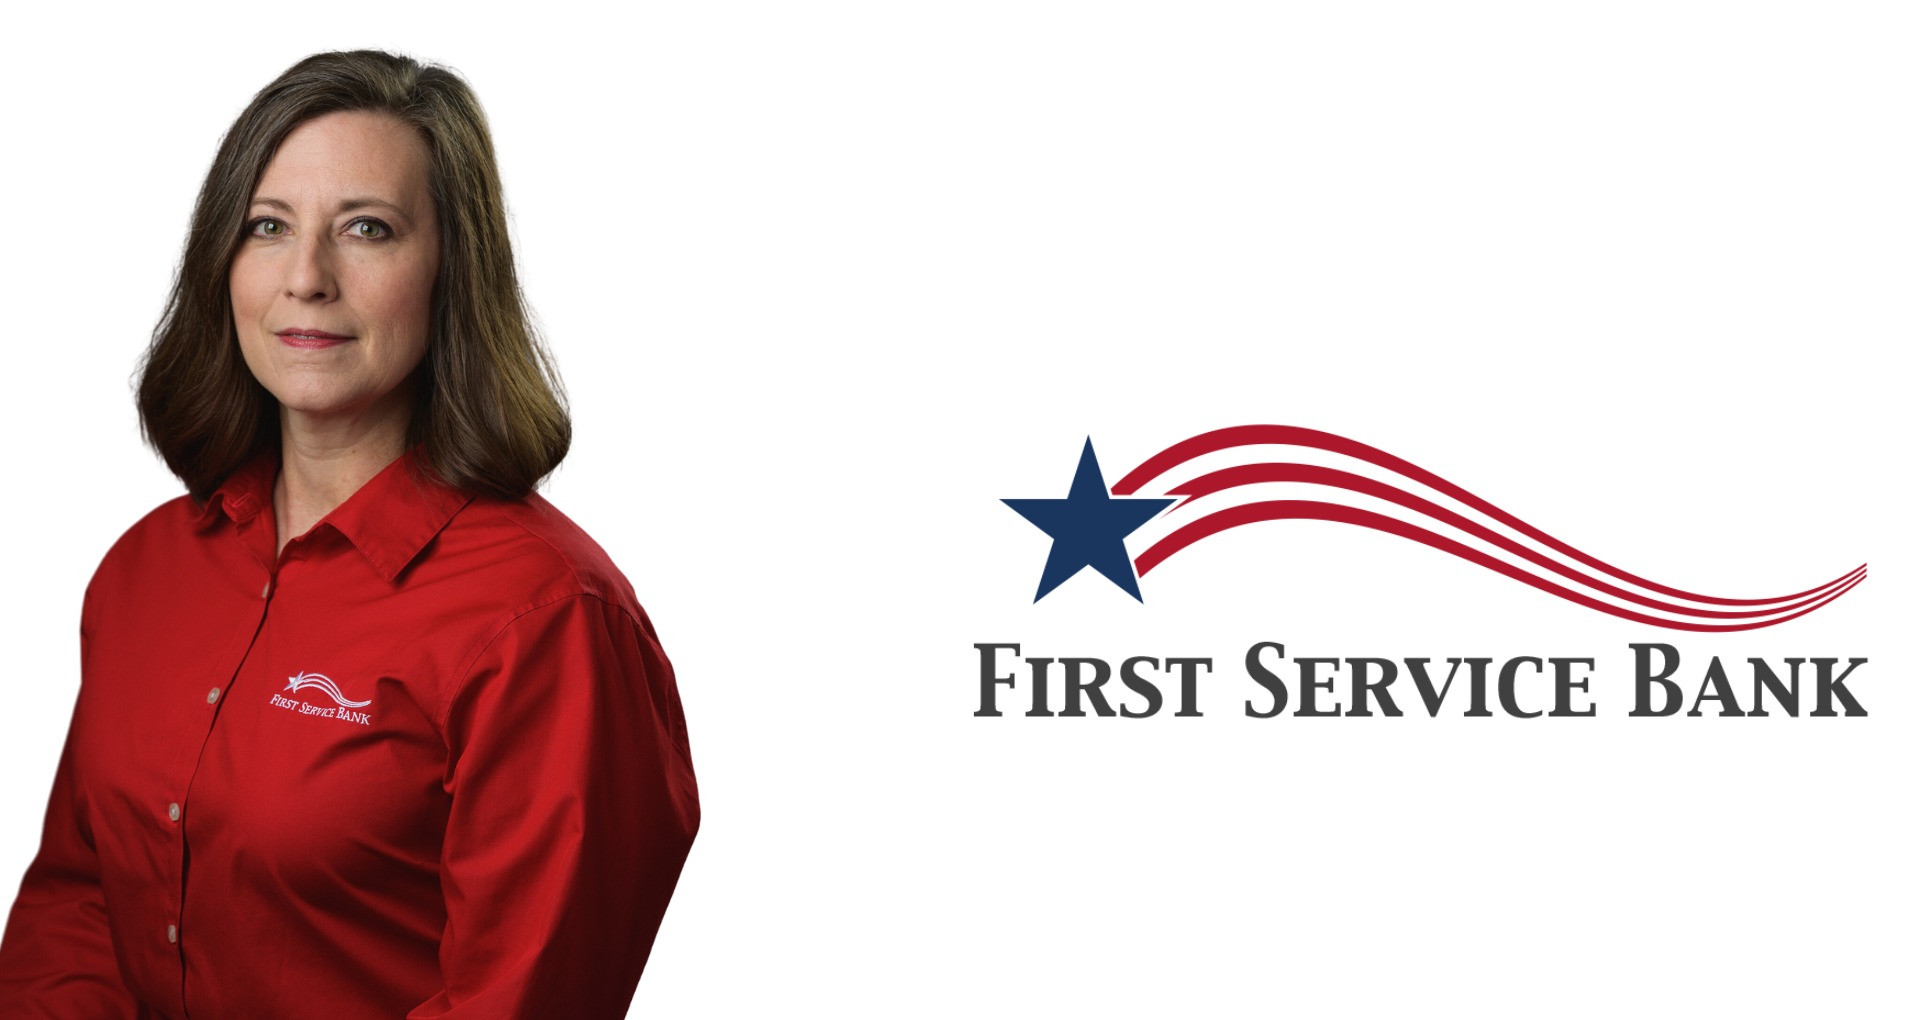 Thomas joins First Service Bank